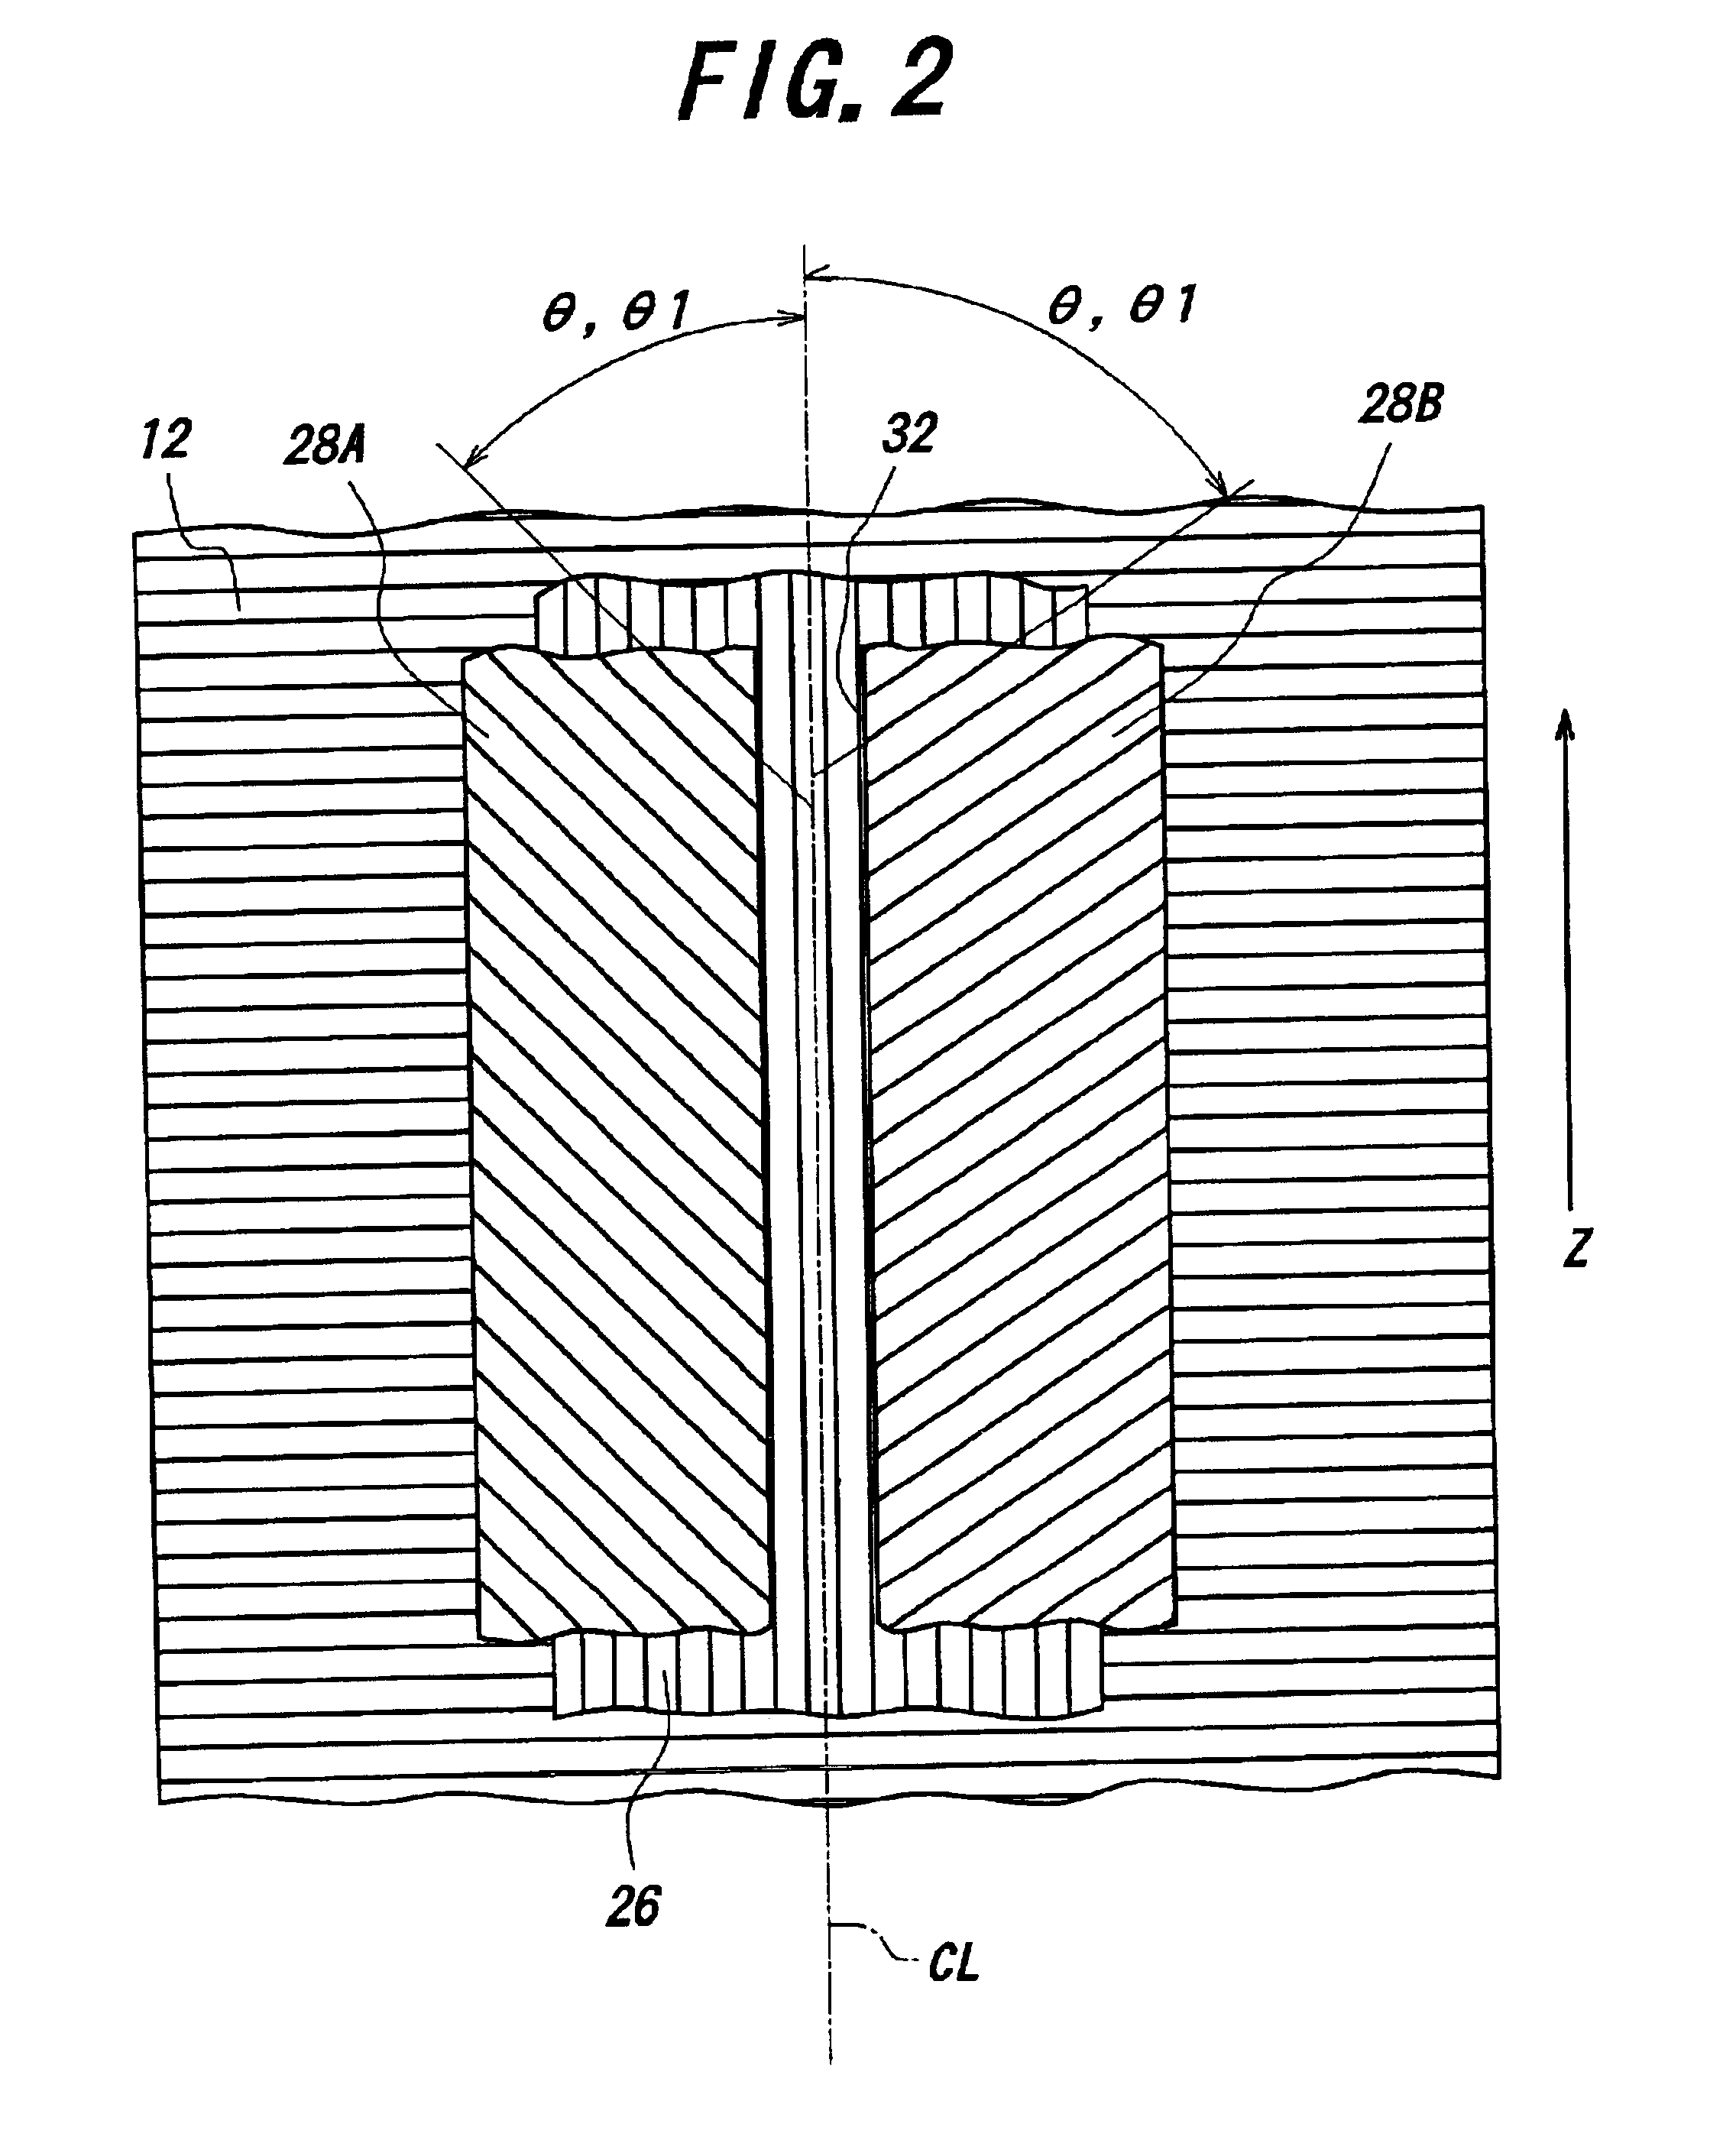 Method of mounting a pneumatic radial tire